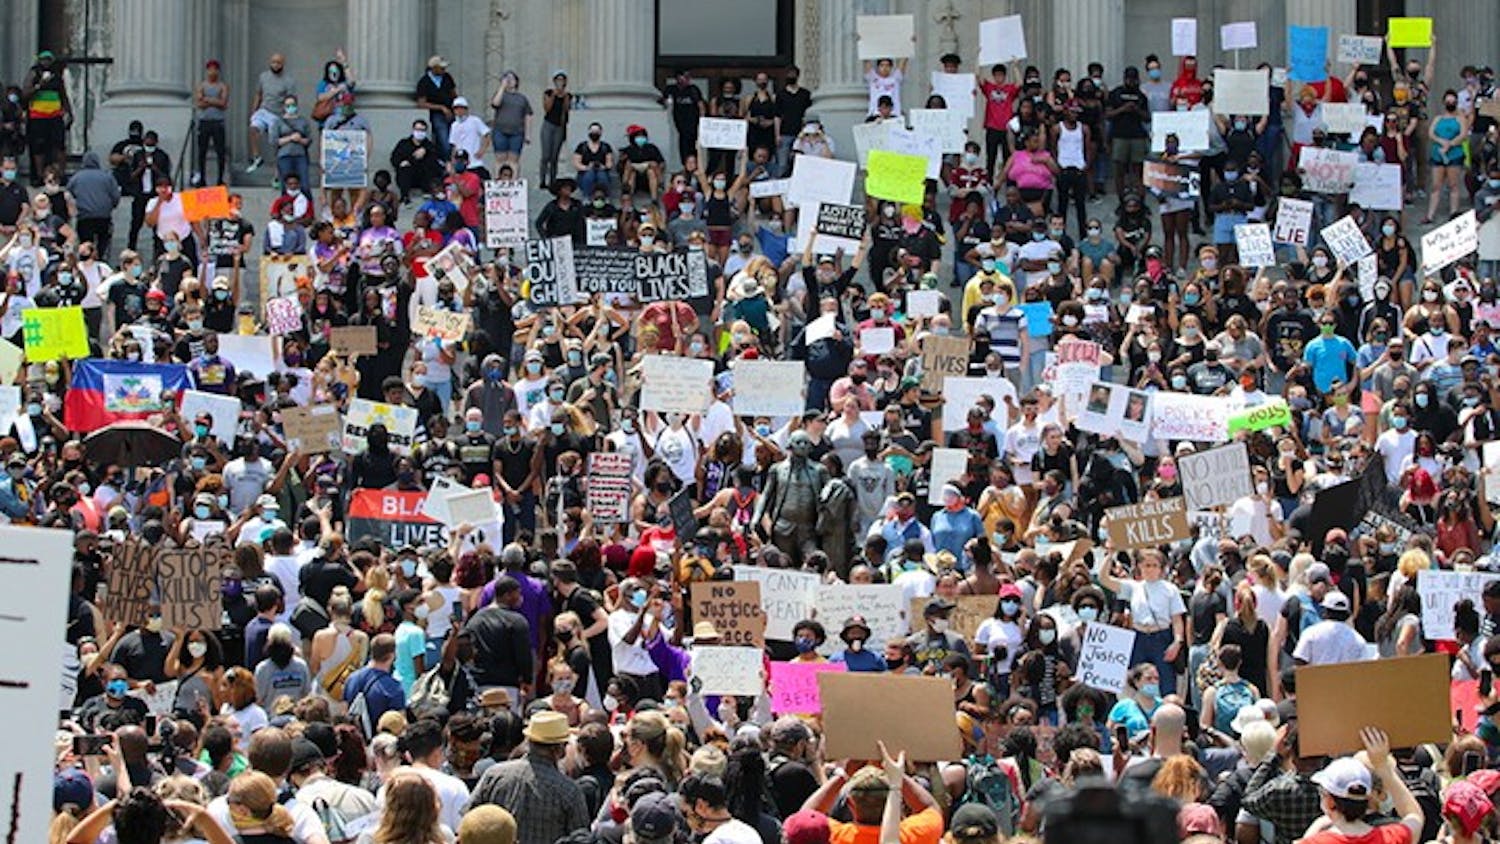 Hundreds of protesters peacefully protested at the Statehouse on May 30. The protestors held a rally on the steps for almost three hours.